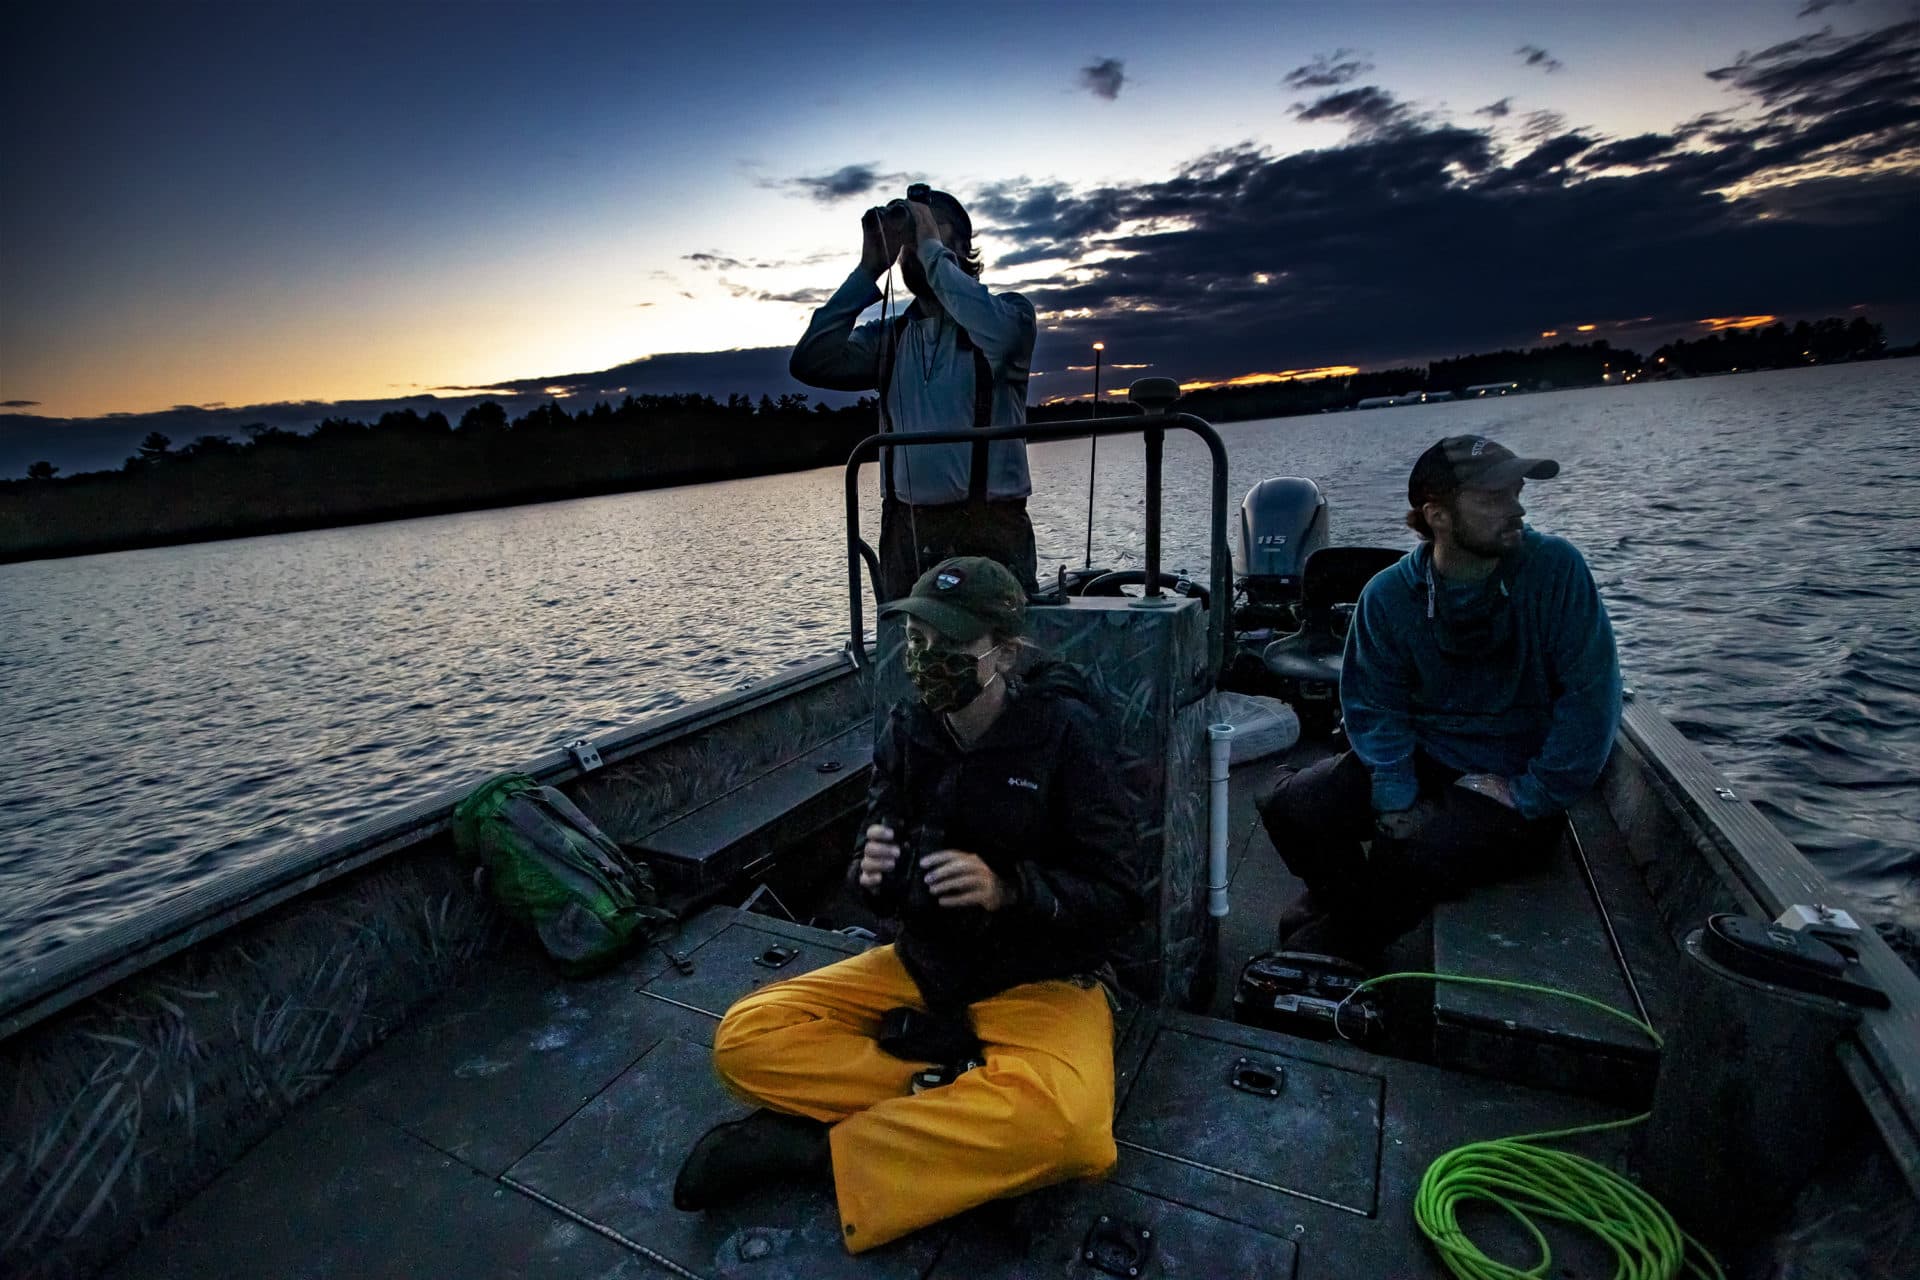 (L-R) Chris Persico, Helen Yurek and Kevin Regan search for a Common Loon chick approximately 9 week old in the Sebego Lake Basin in Standish, Maine, which they plan to capture and release in Lakeville, Massachusetts later that evening. (Jesse Costa/WBUR)